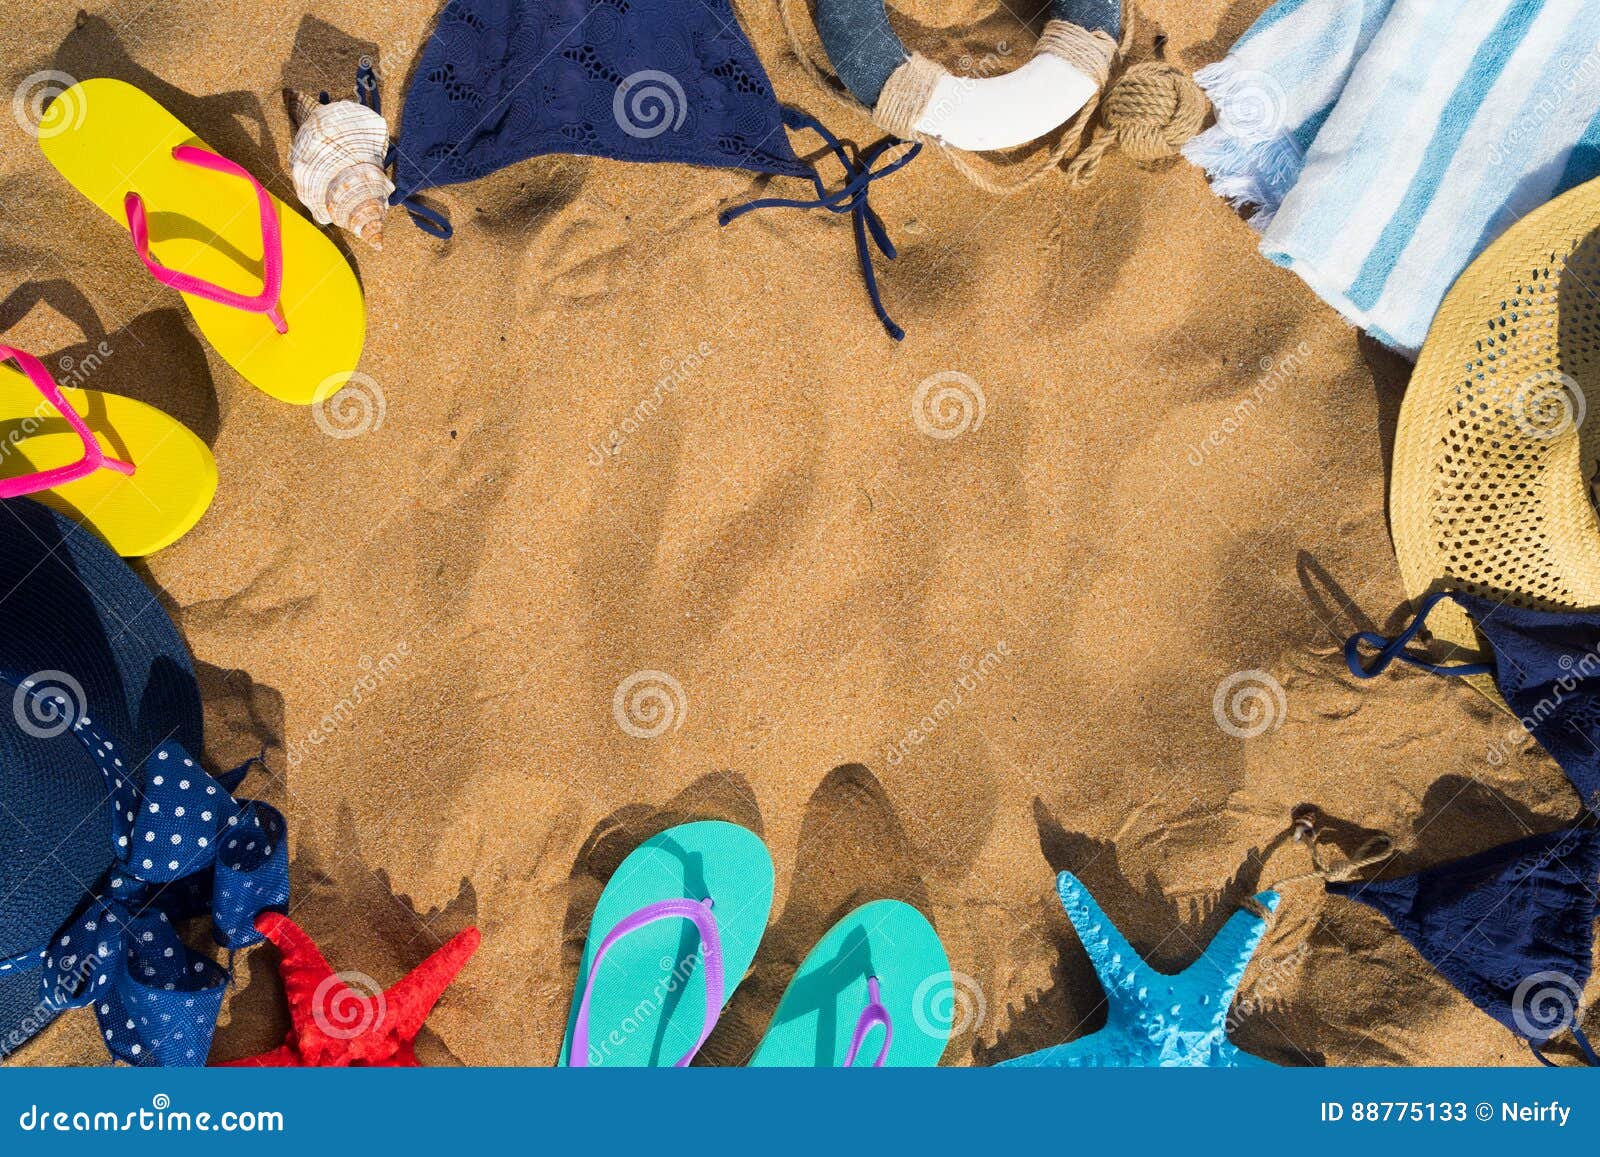 Summer beach fun stock image. Image of lifestyle, family - 88775133